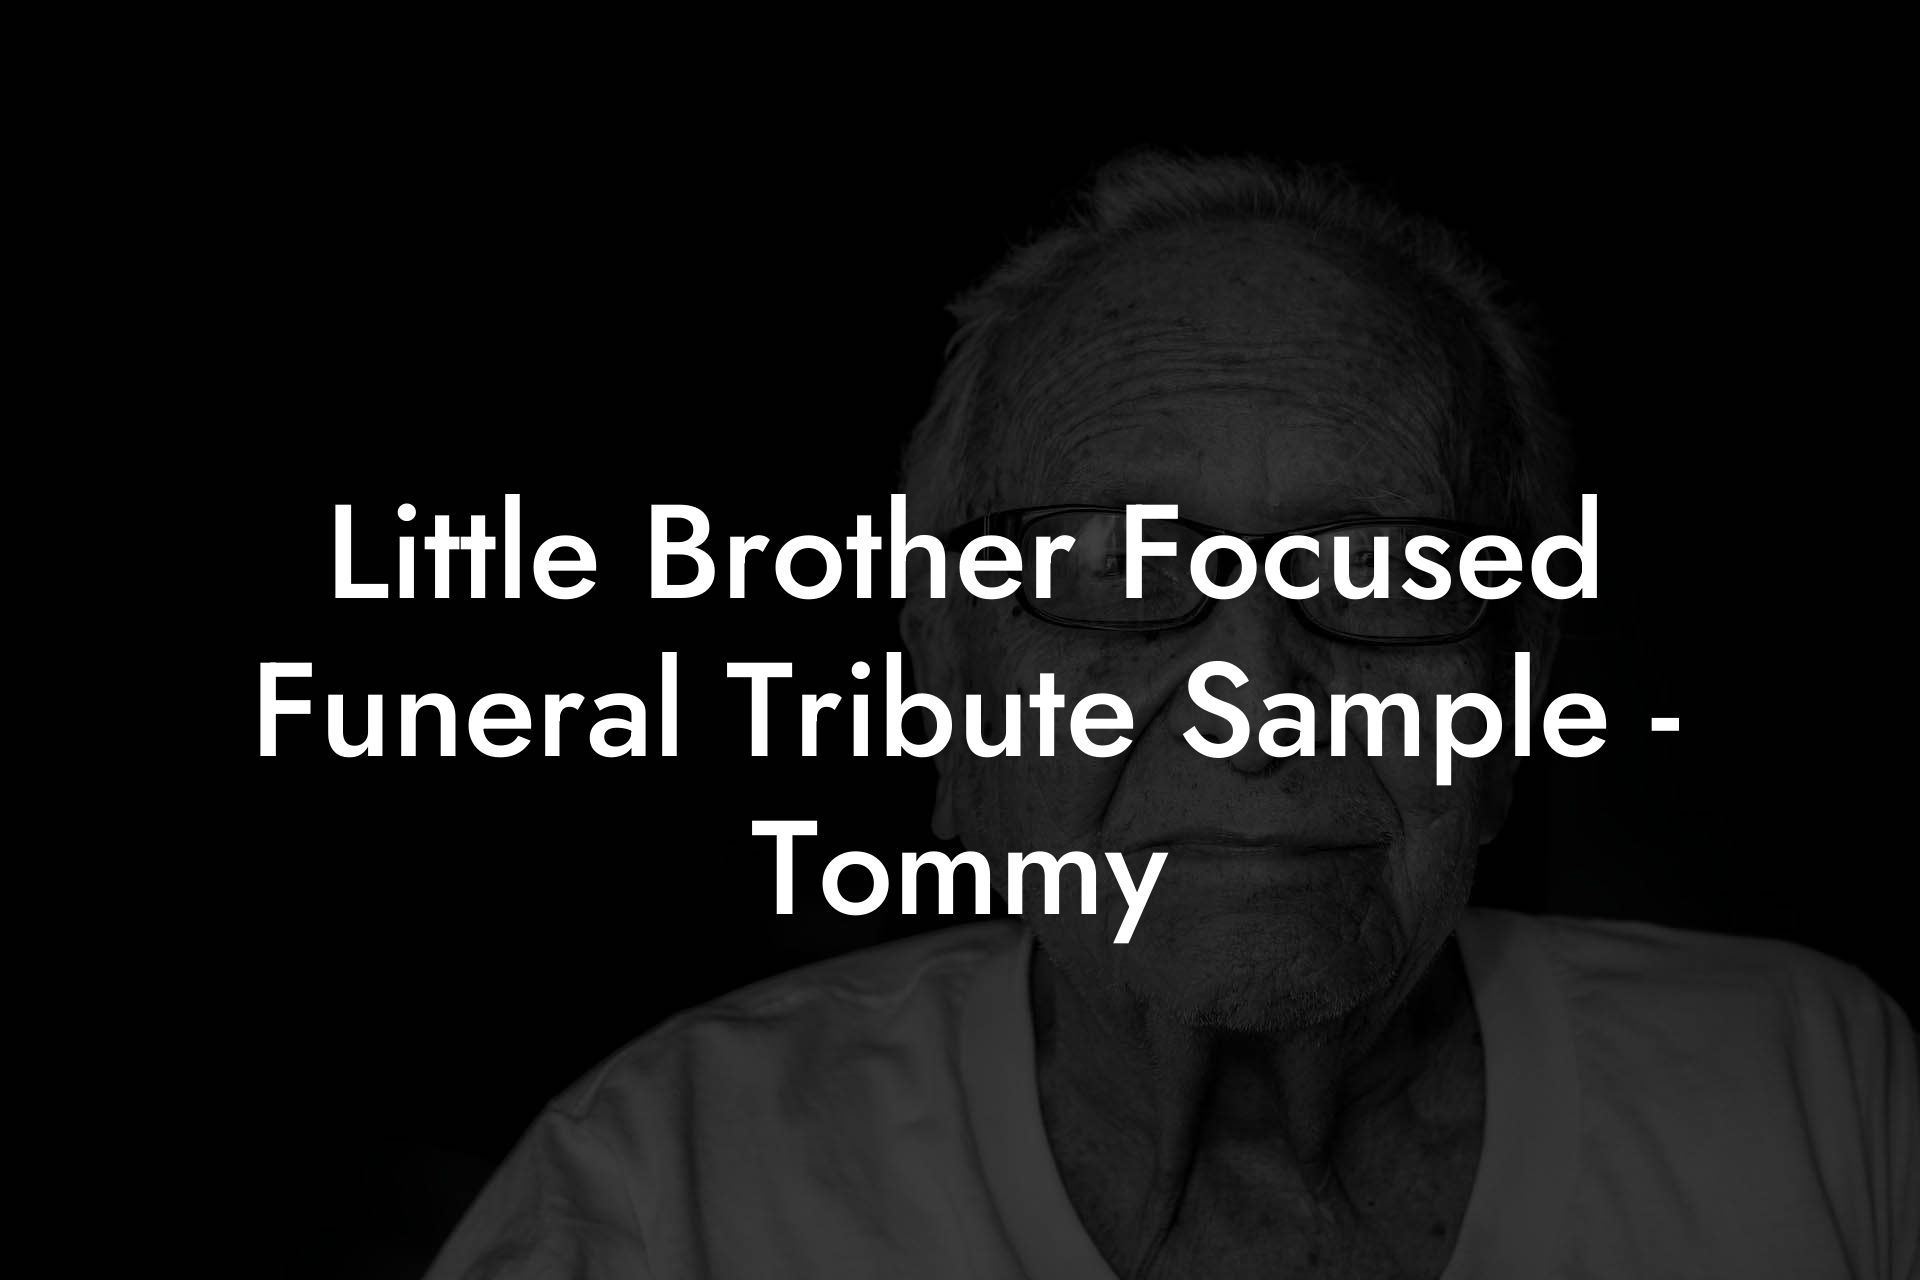 Little Brother Focused Funeral Tribute Sample - Tommy